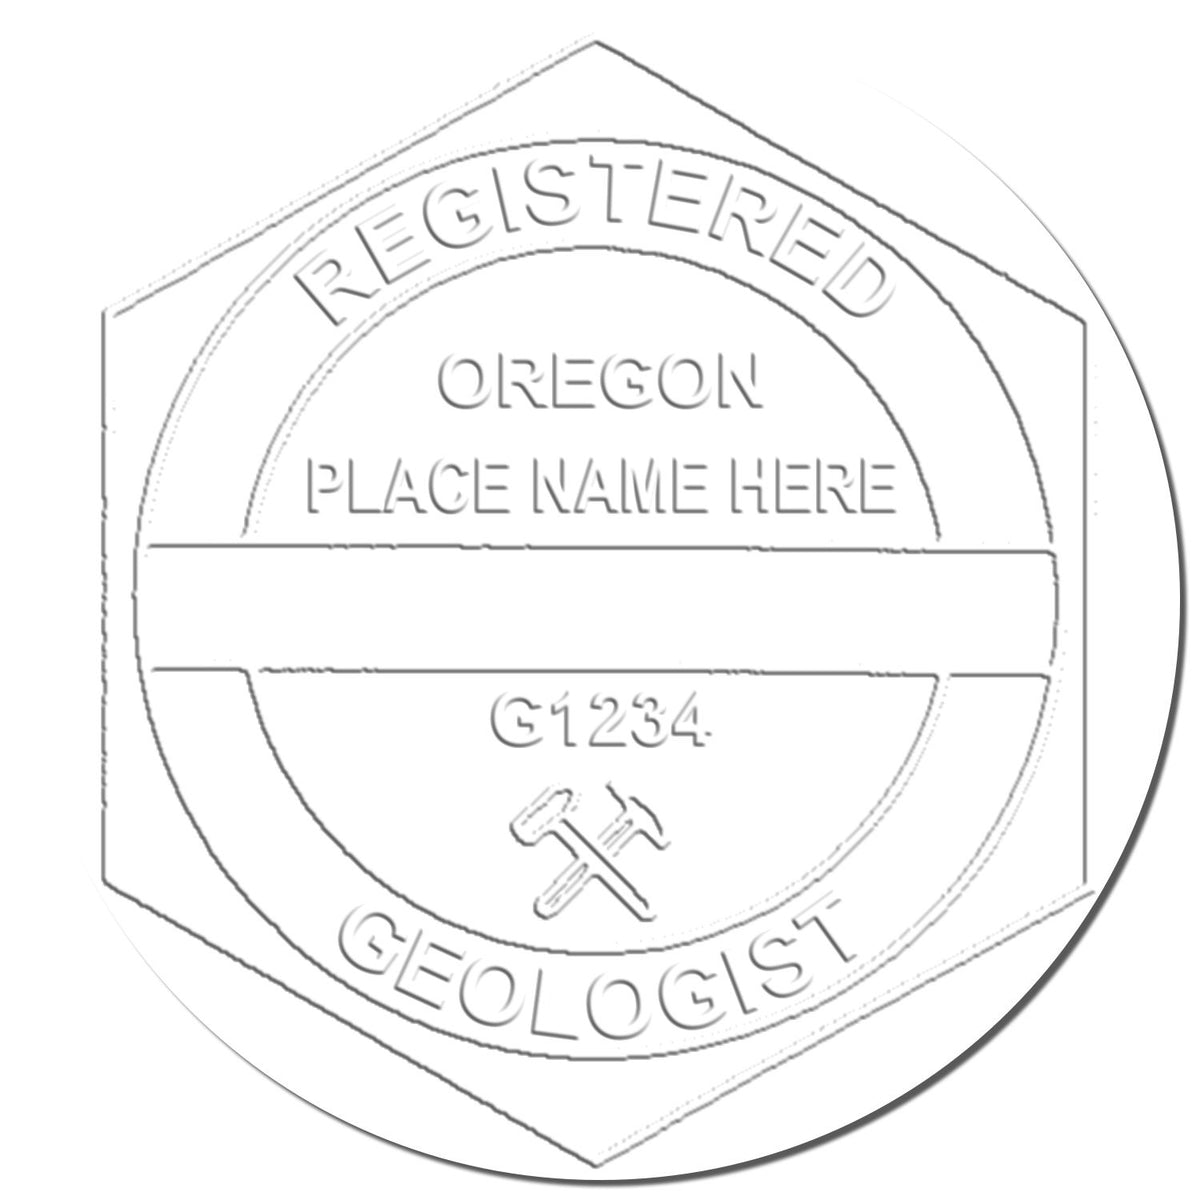 A stamped imprint of the Gift Oregon Geologist Seal in this stylish lifestyle photo, setting the tone for a unique and personalized product.